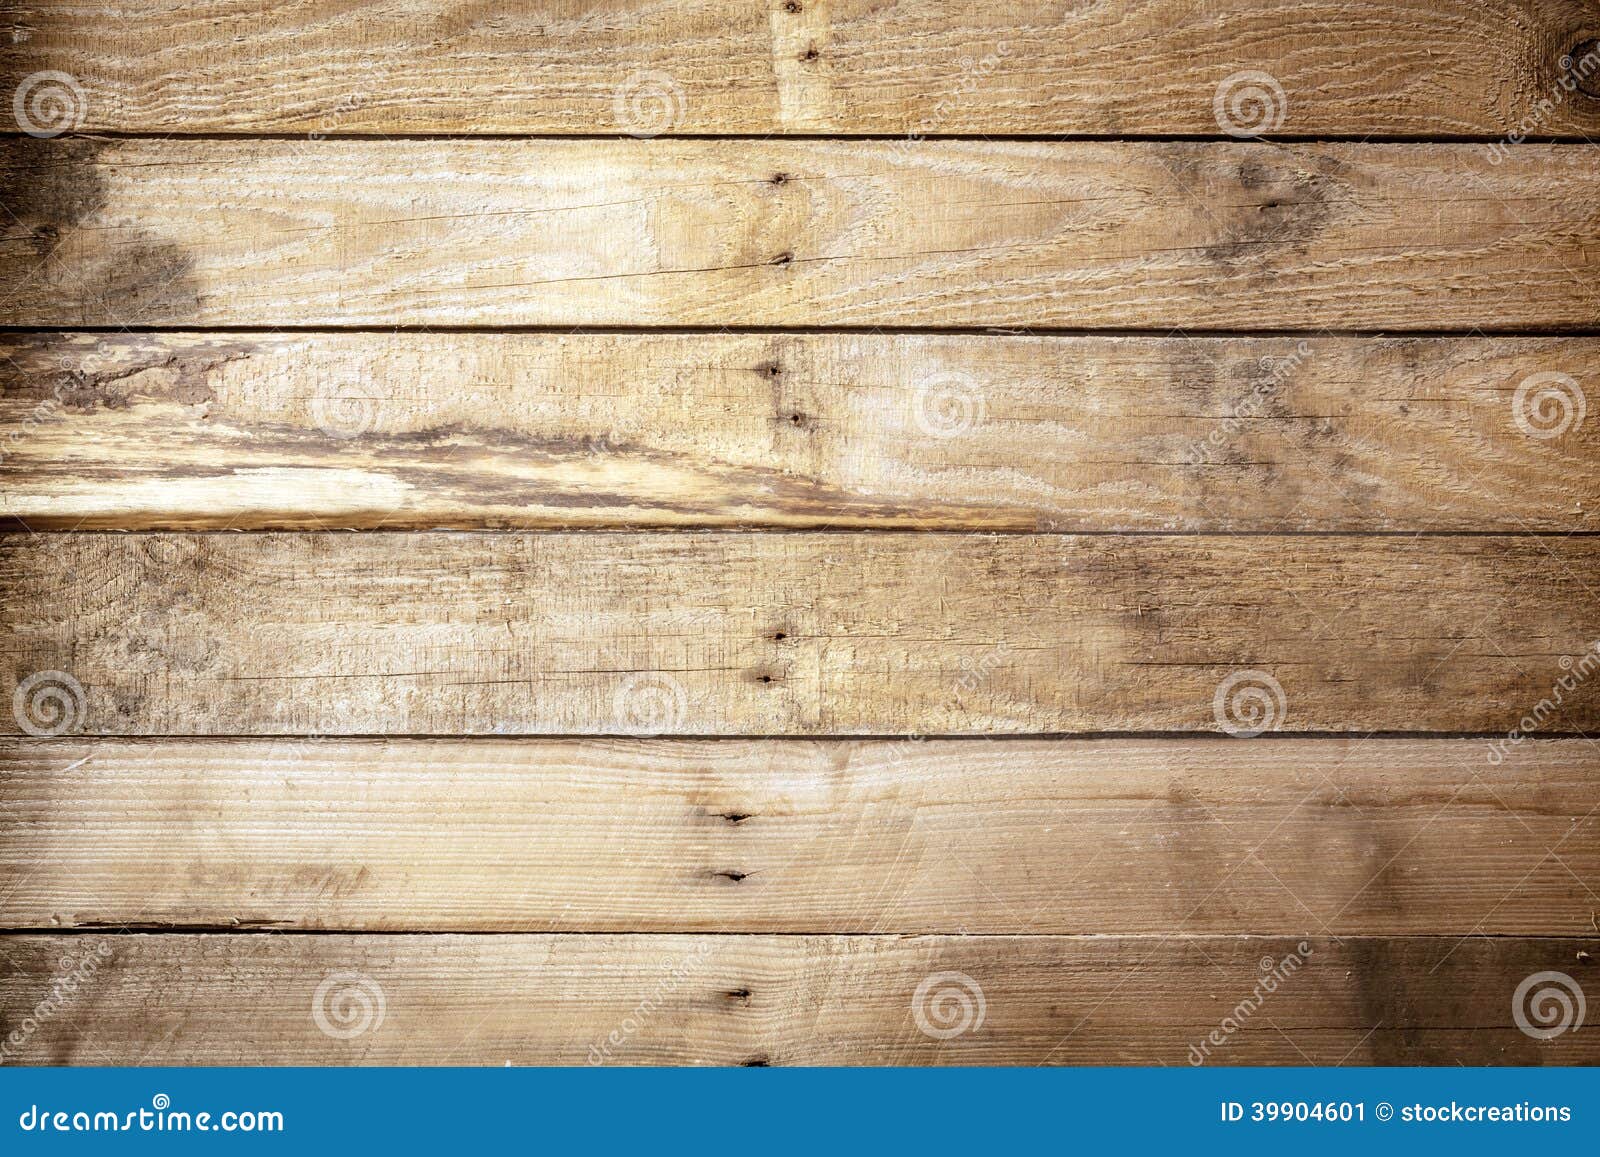 old weathered rustic wooden background